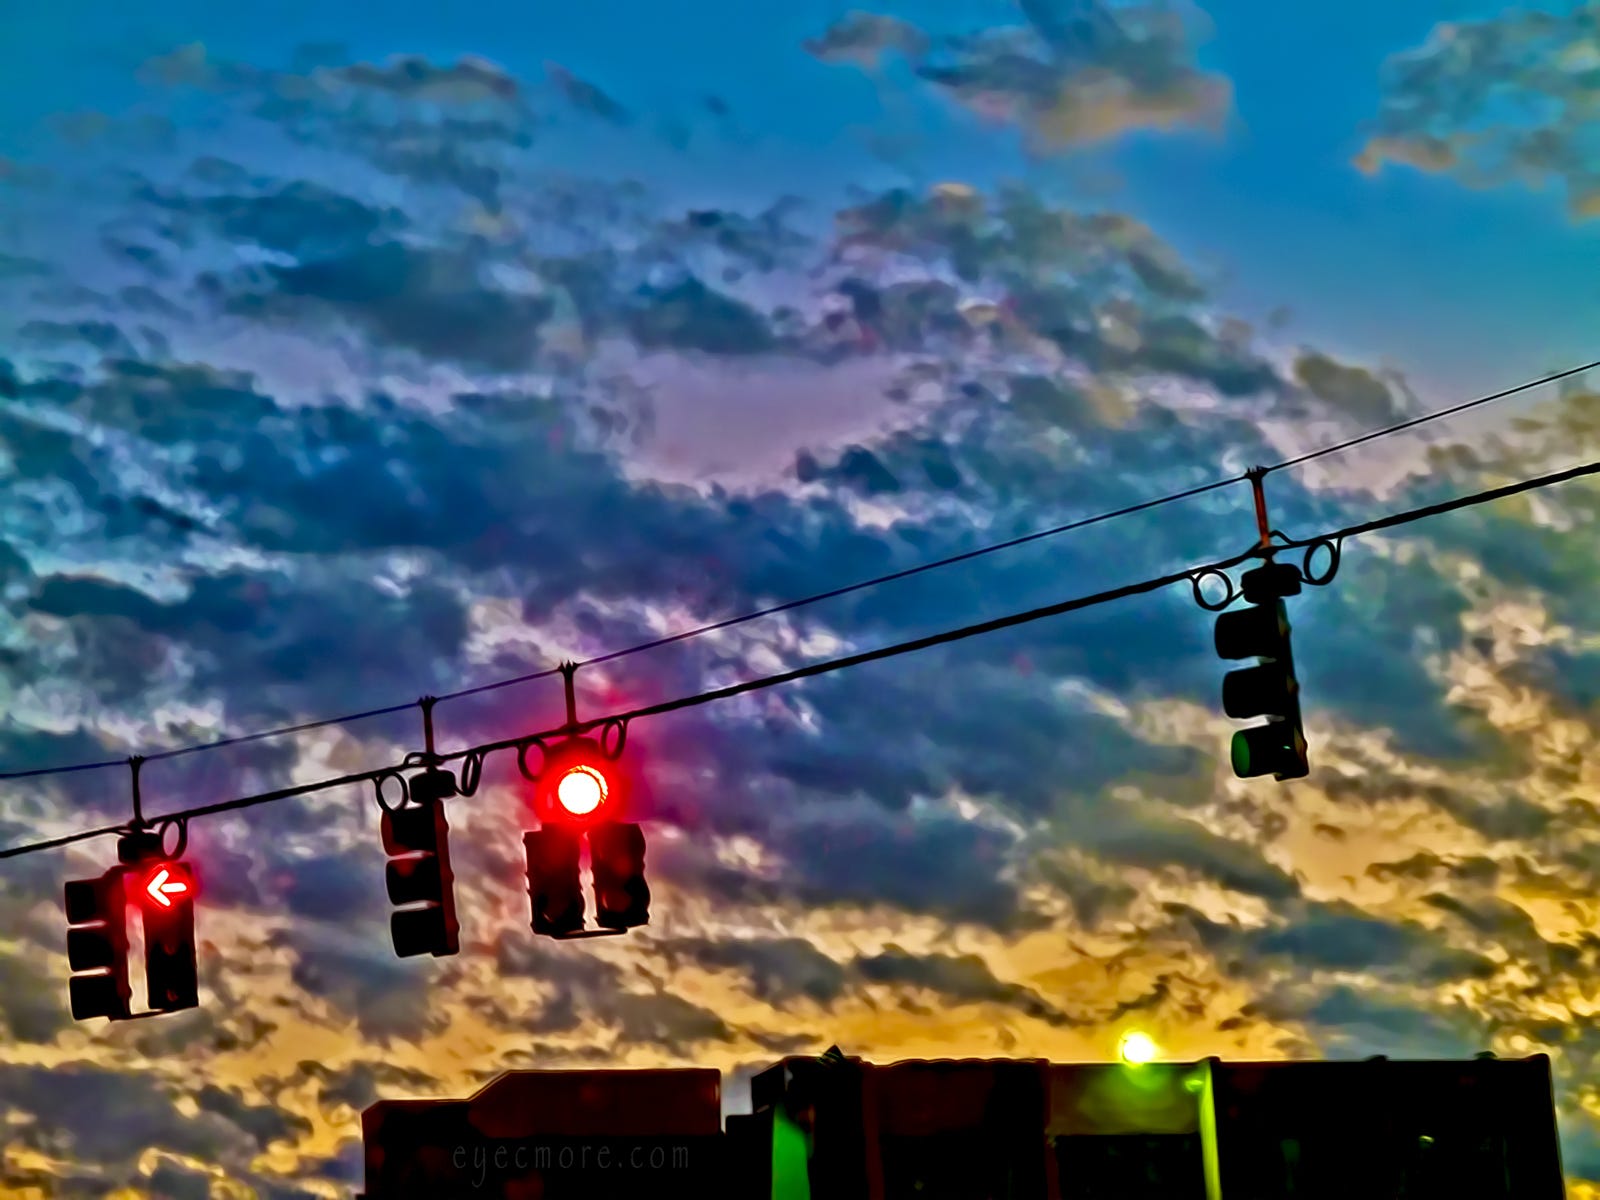 STOP Traffic Lights & Sunset by eyecmore